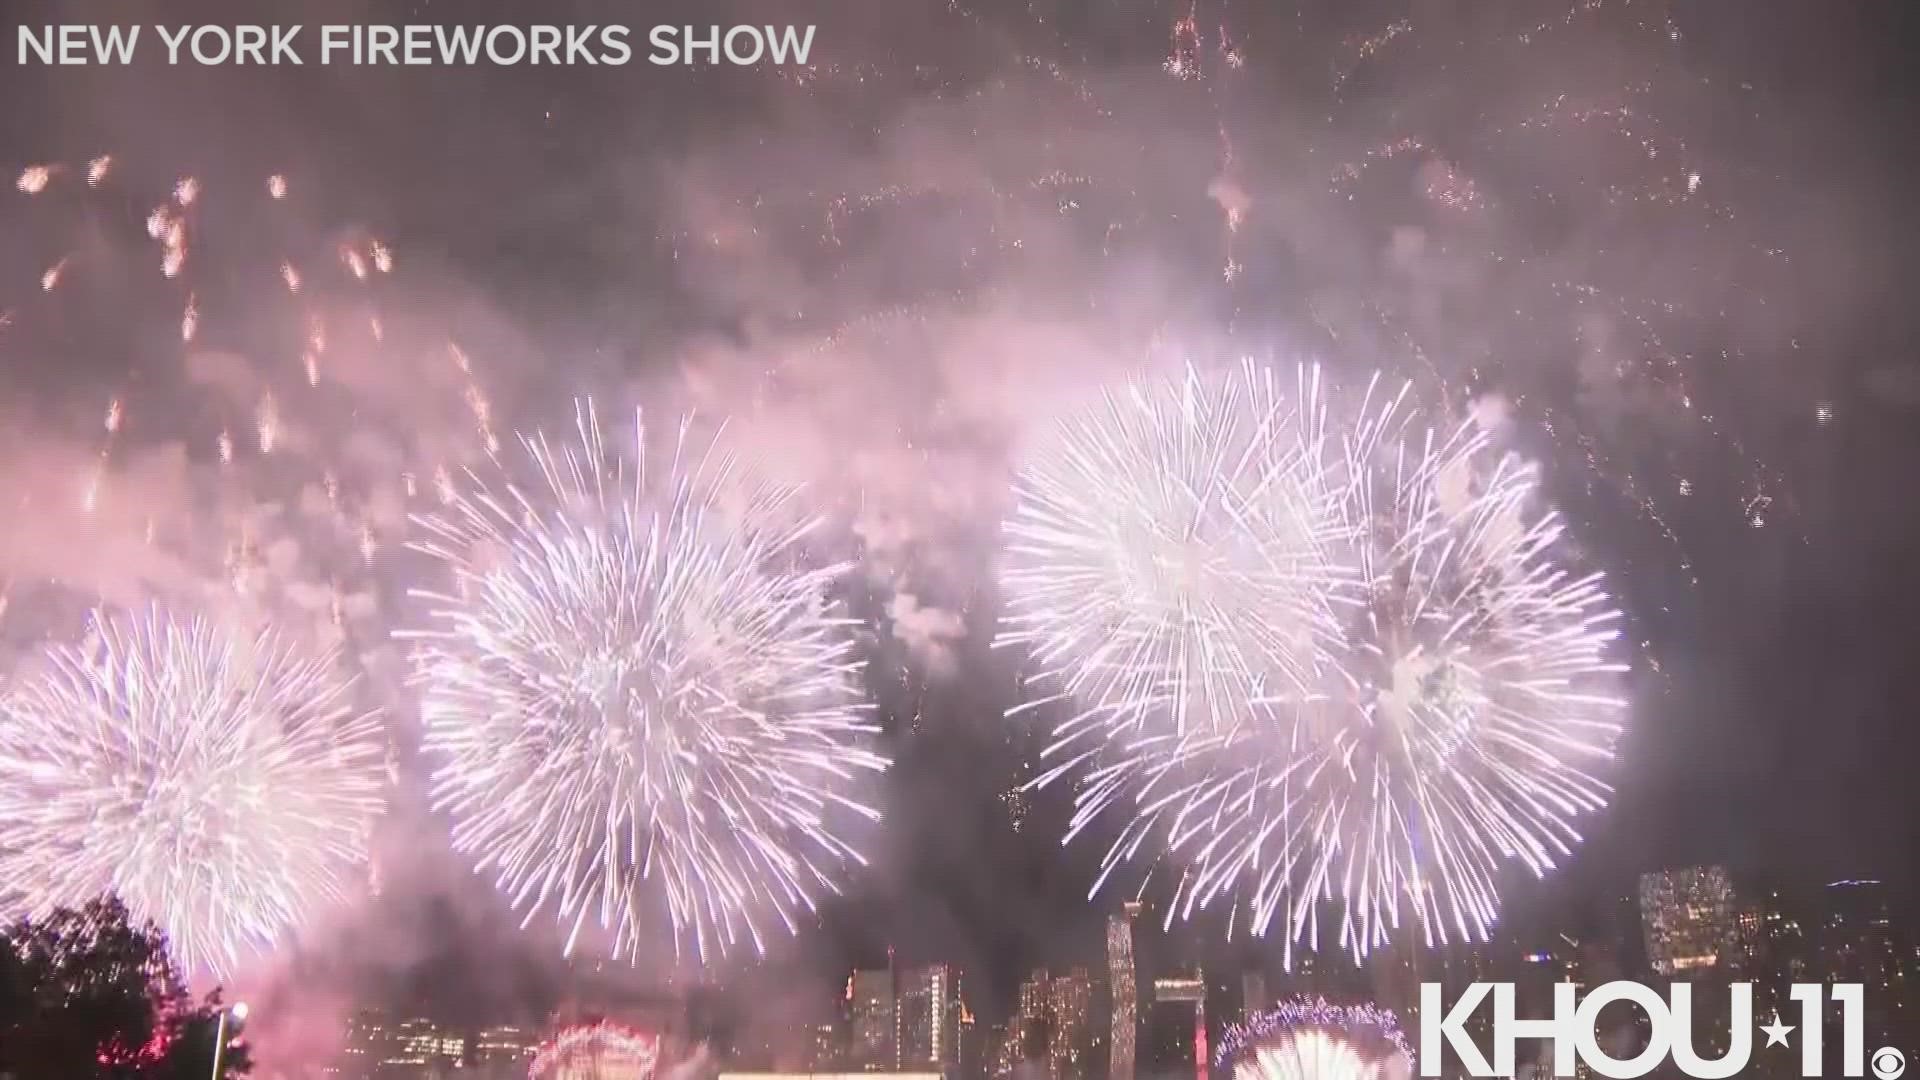 Hundreds of fireworks lit the sky in New York during the Fourth of July.